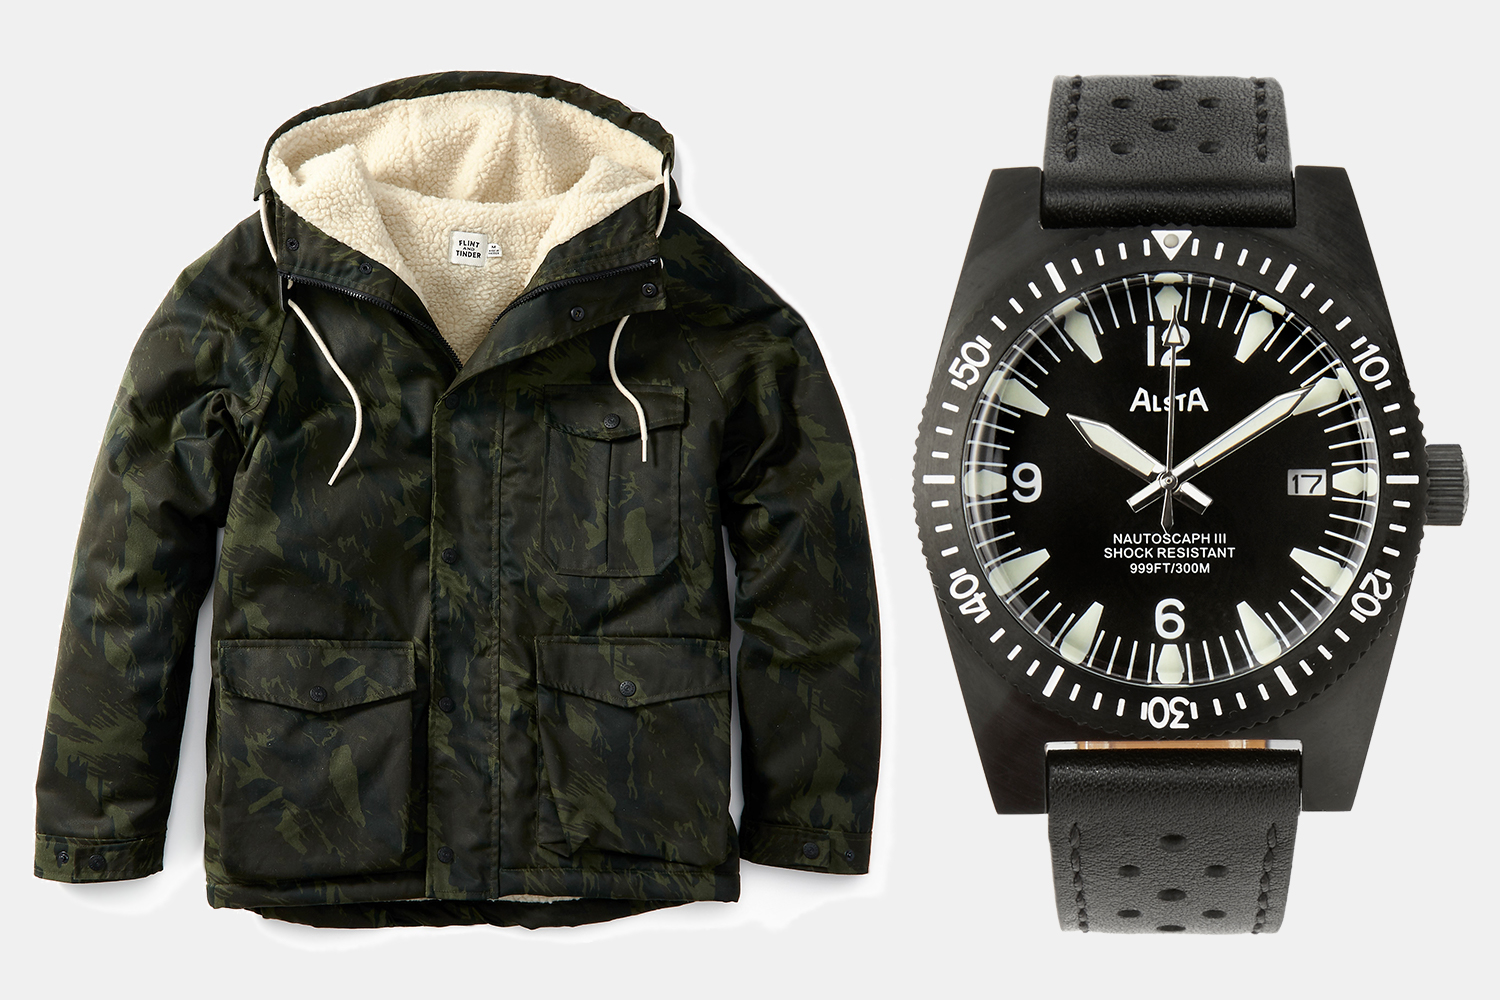 Huckberry Extra Clearance Sale on Men's Style and Gear